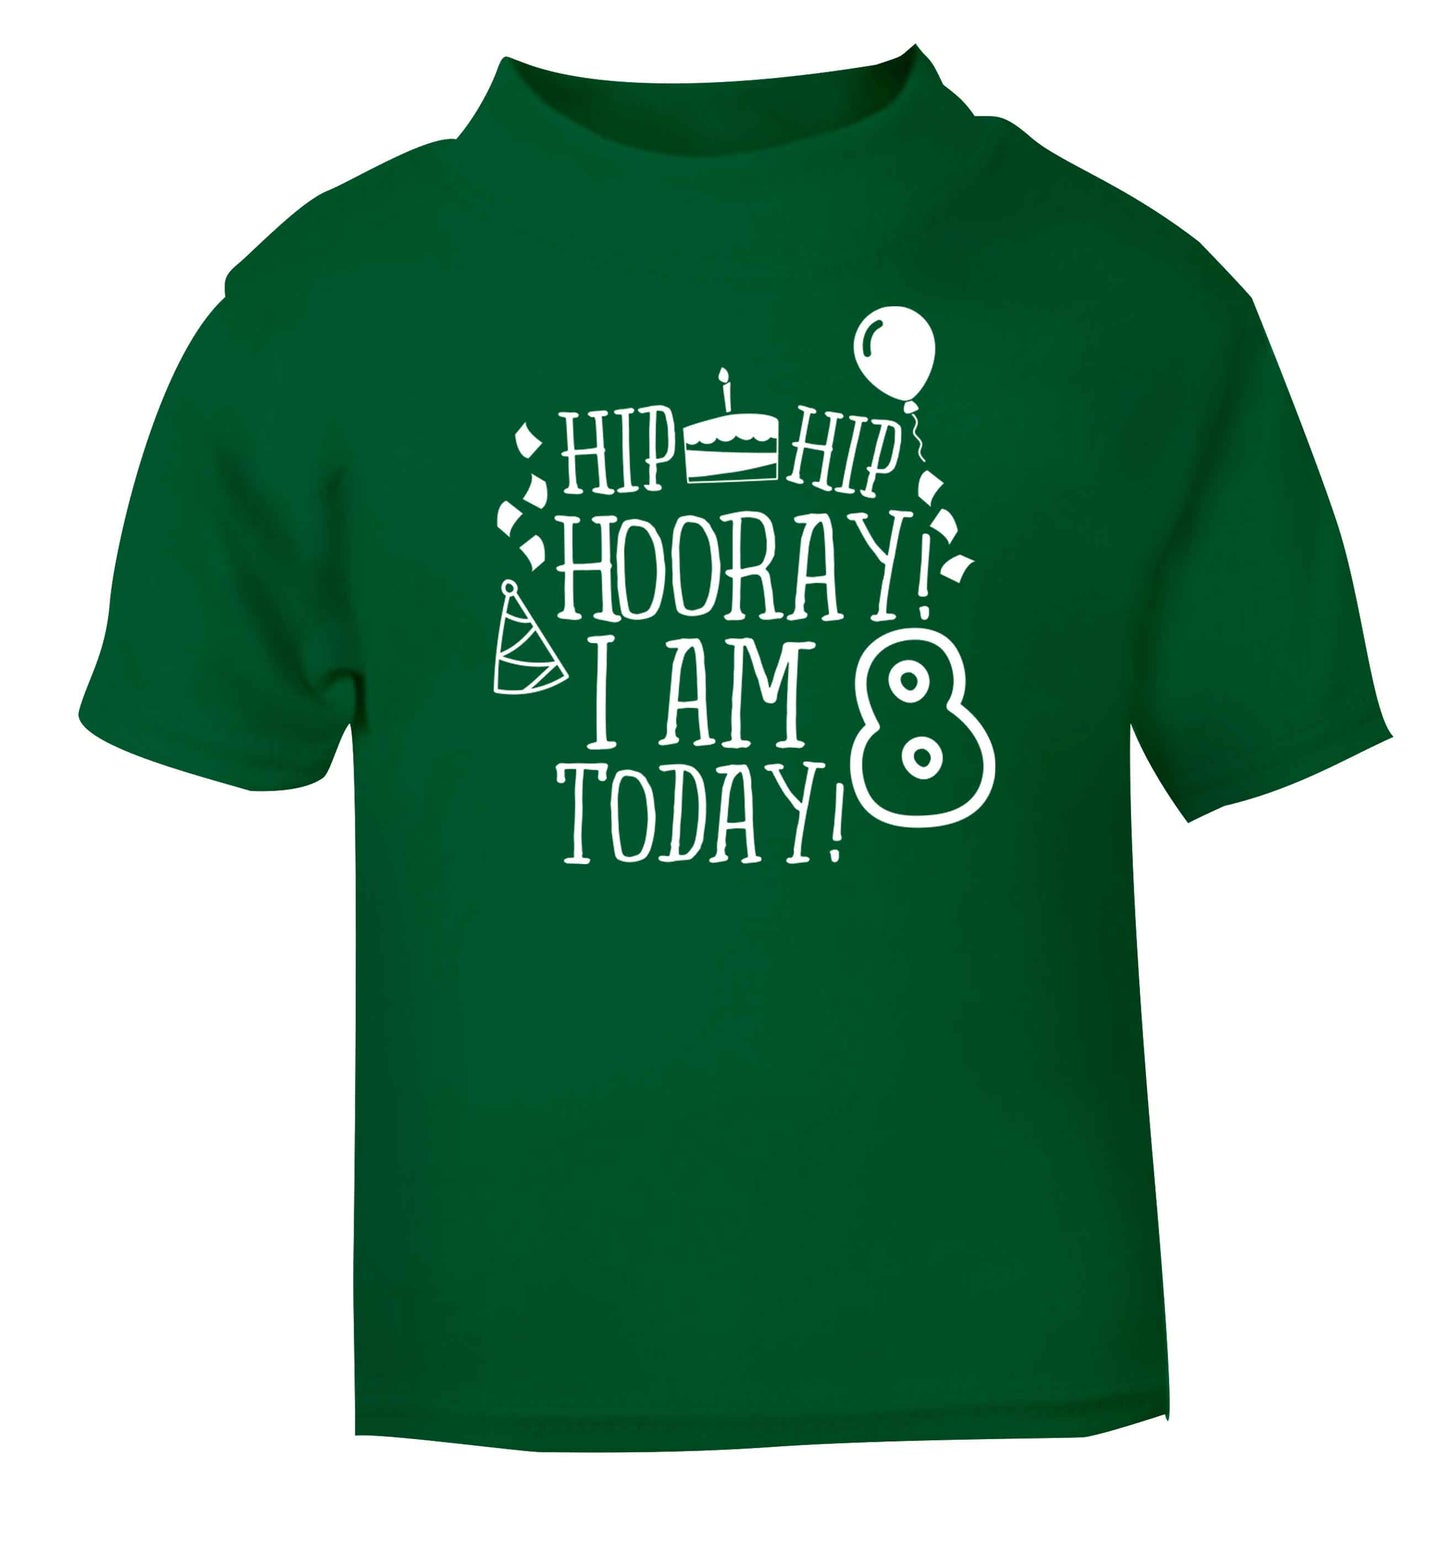 Hip hip hooray I am 8 today! green baby toddler Tshirt 2 Years